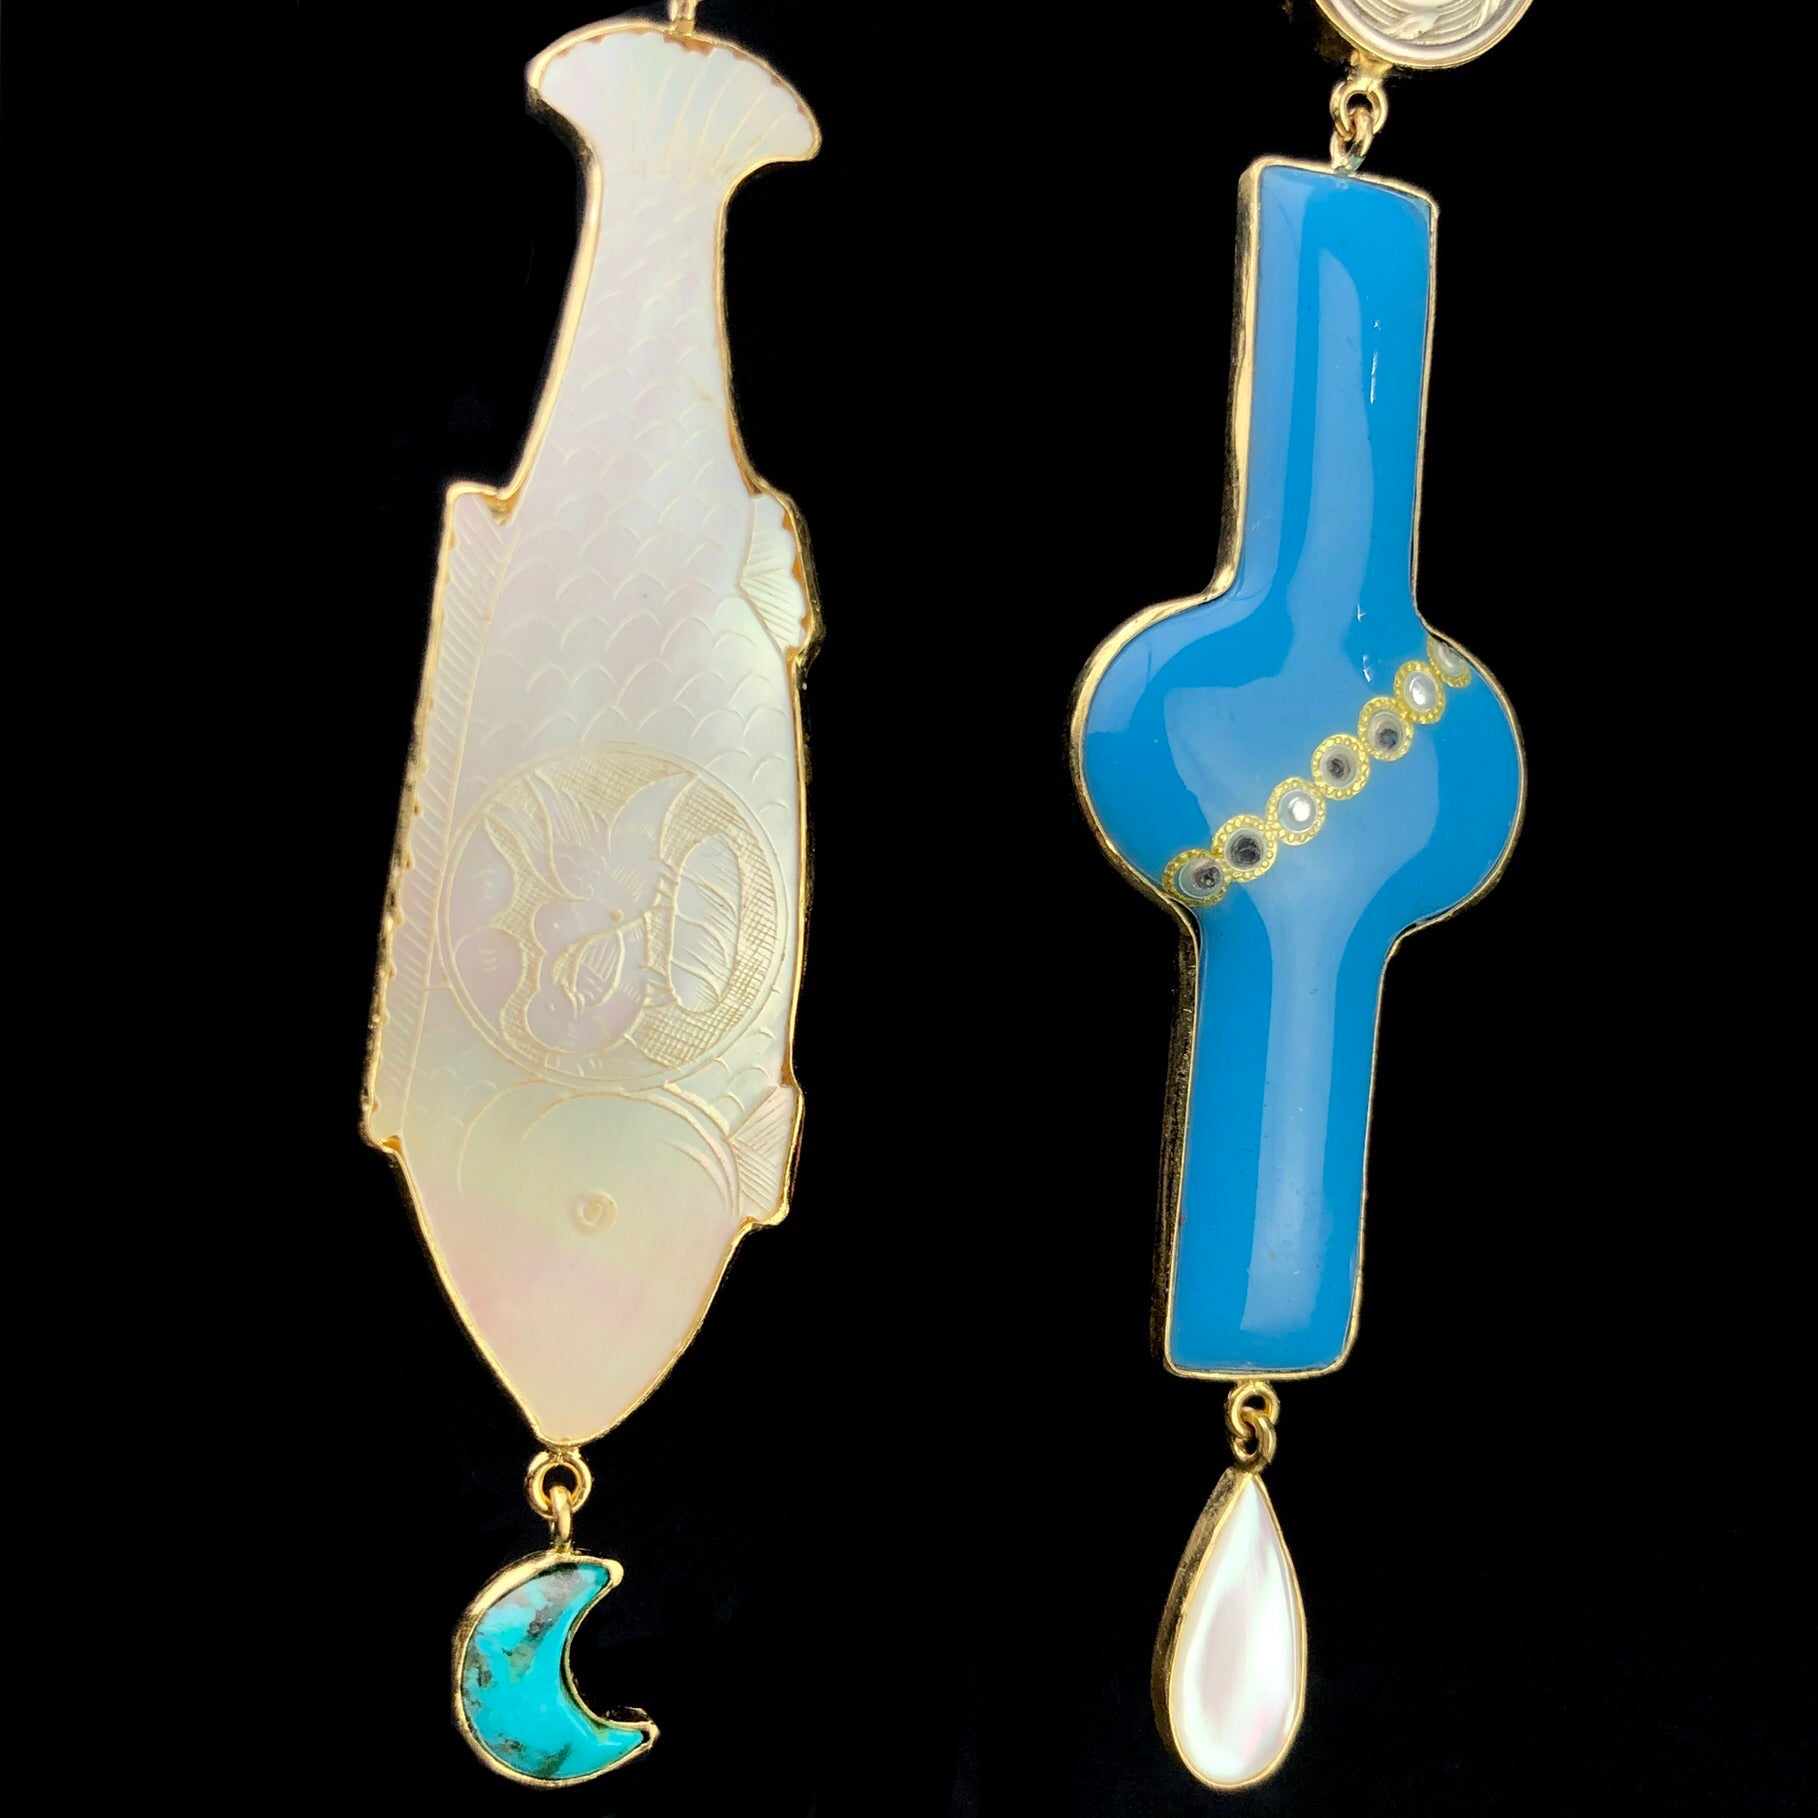 Detail view of Mother of Pearl fish token and blue enamel buckle used to make the Blue Fish Earrings